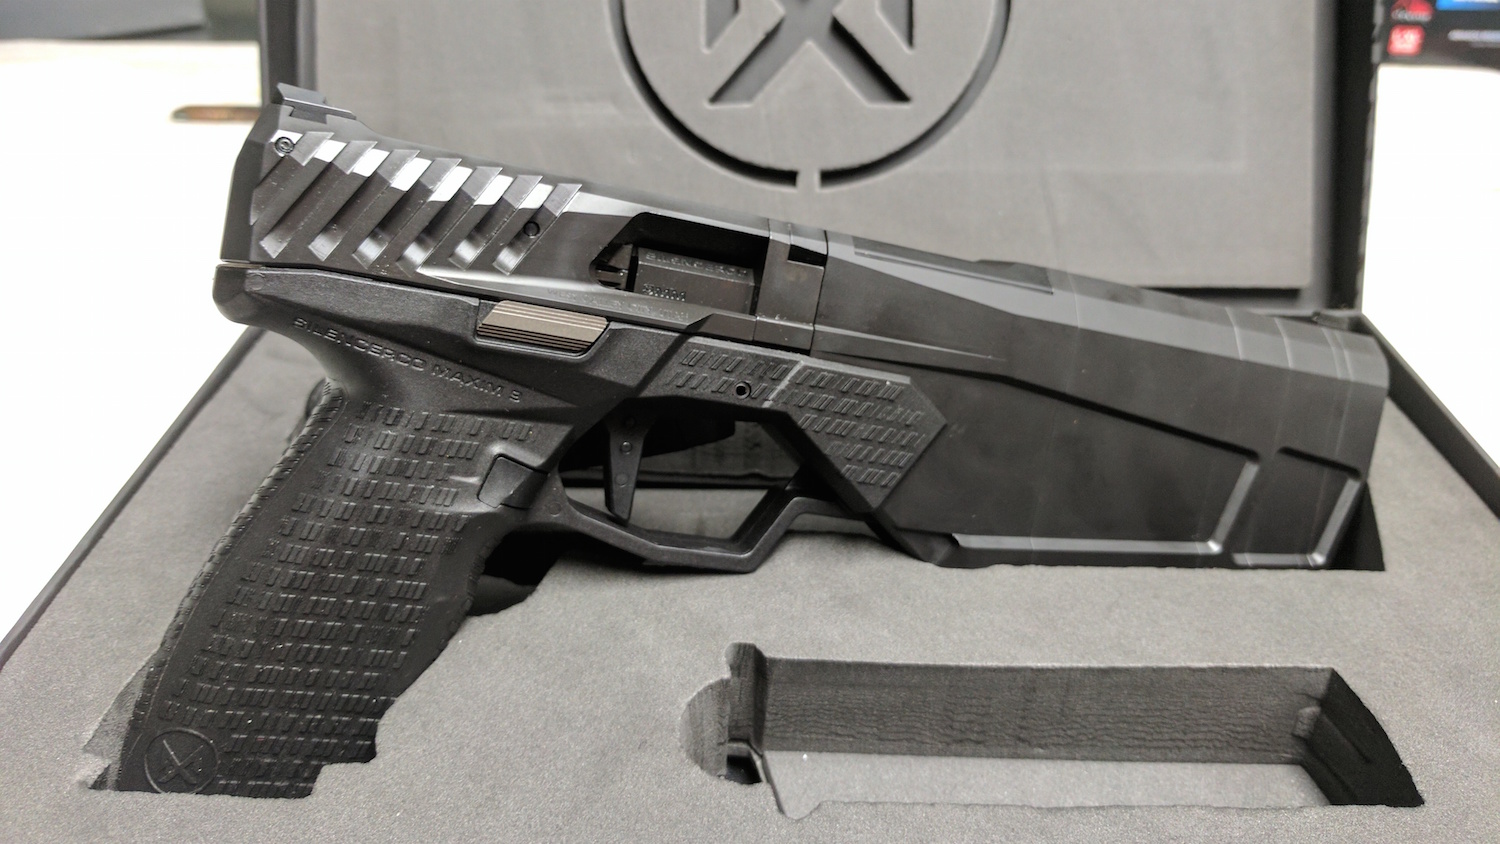 SilencerCo Donates New Maxim 9 Suppressed Pistol to NRA Museums Collection